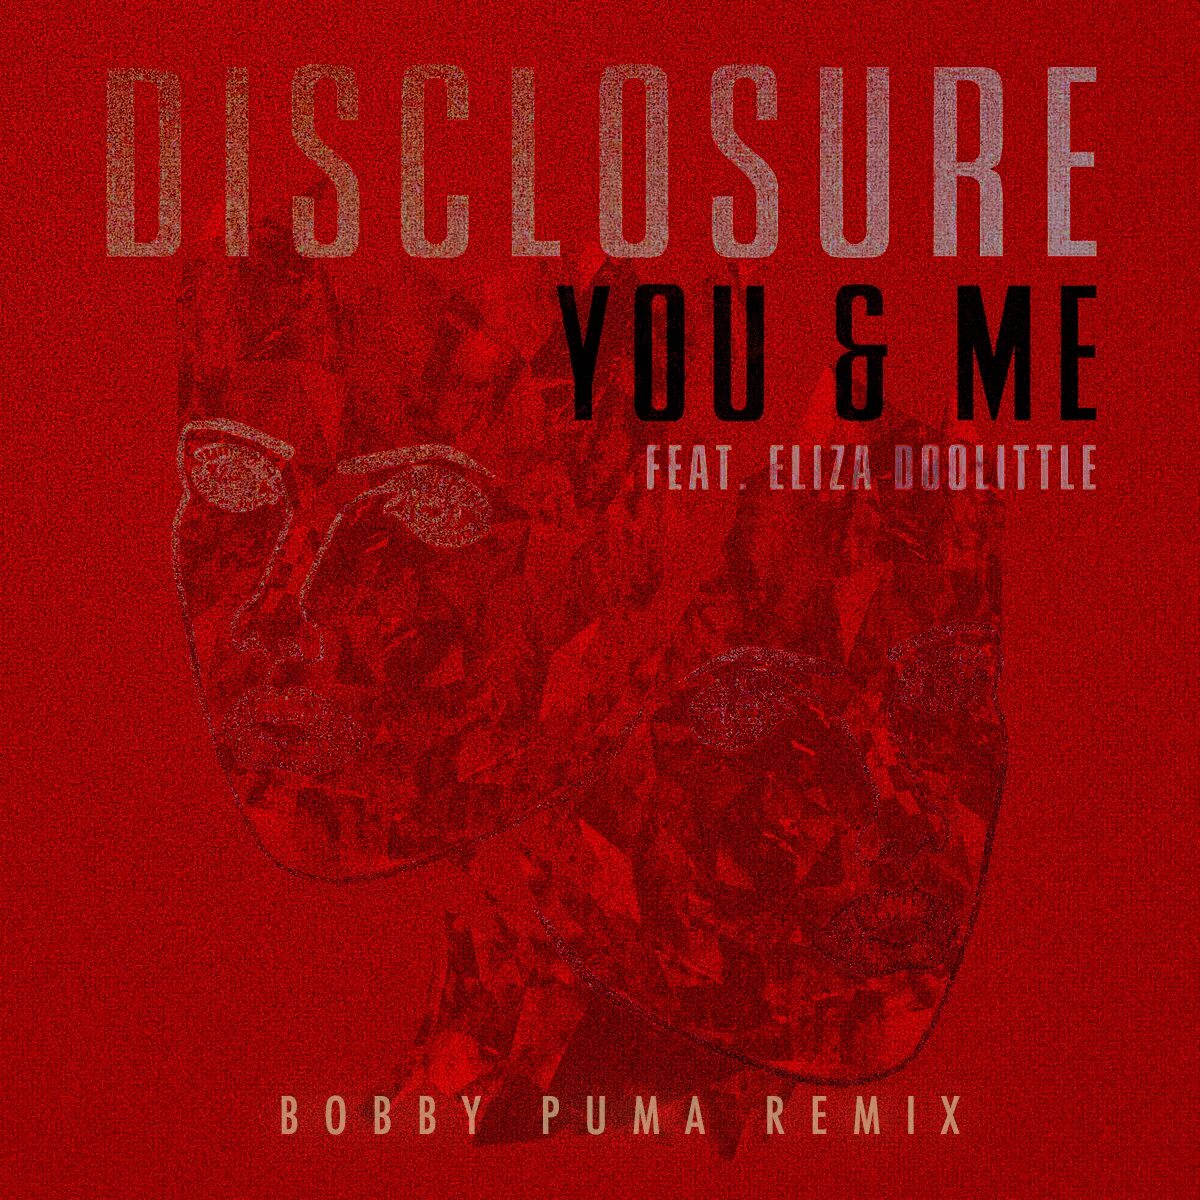 Feat eliza doolittle. You & me - Disclosure (Flume. Disclosure feat. Eliza Doolittle - you & me. Disclosure & Eliza Doolittle - you & me (Flume Remix). Disclosure you and me.